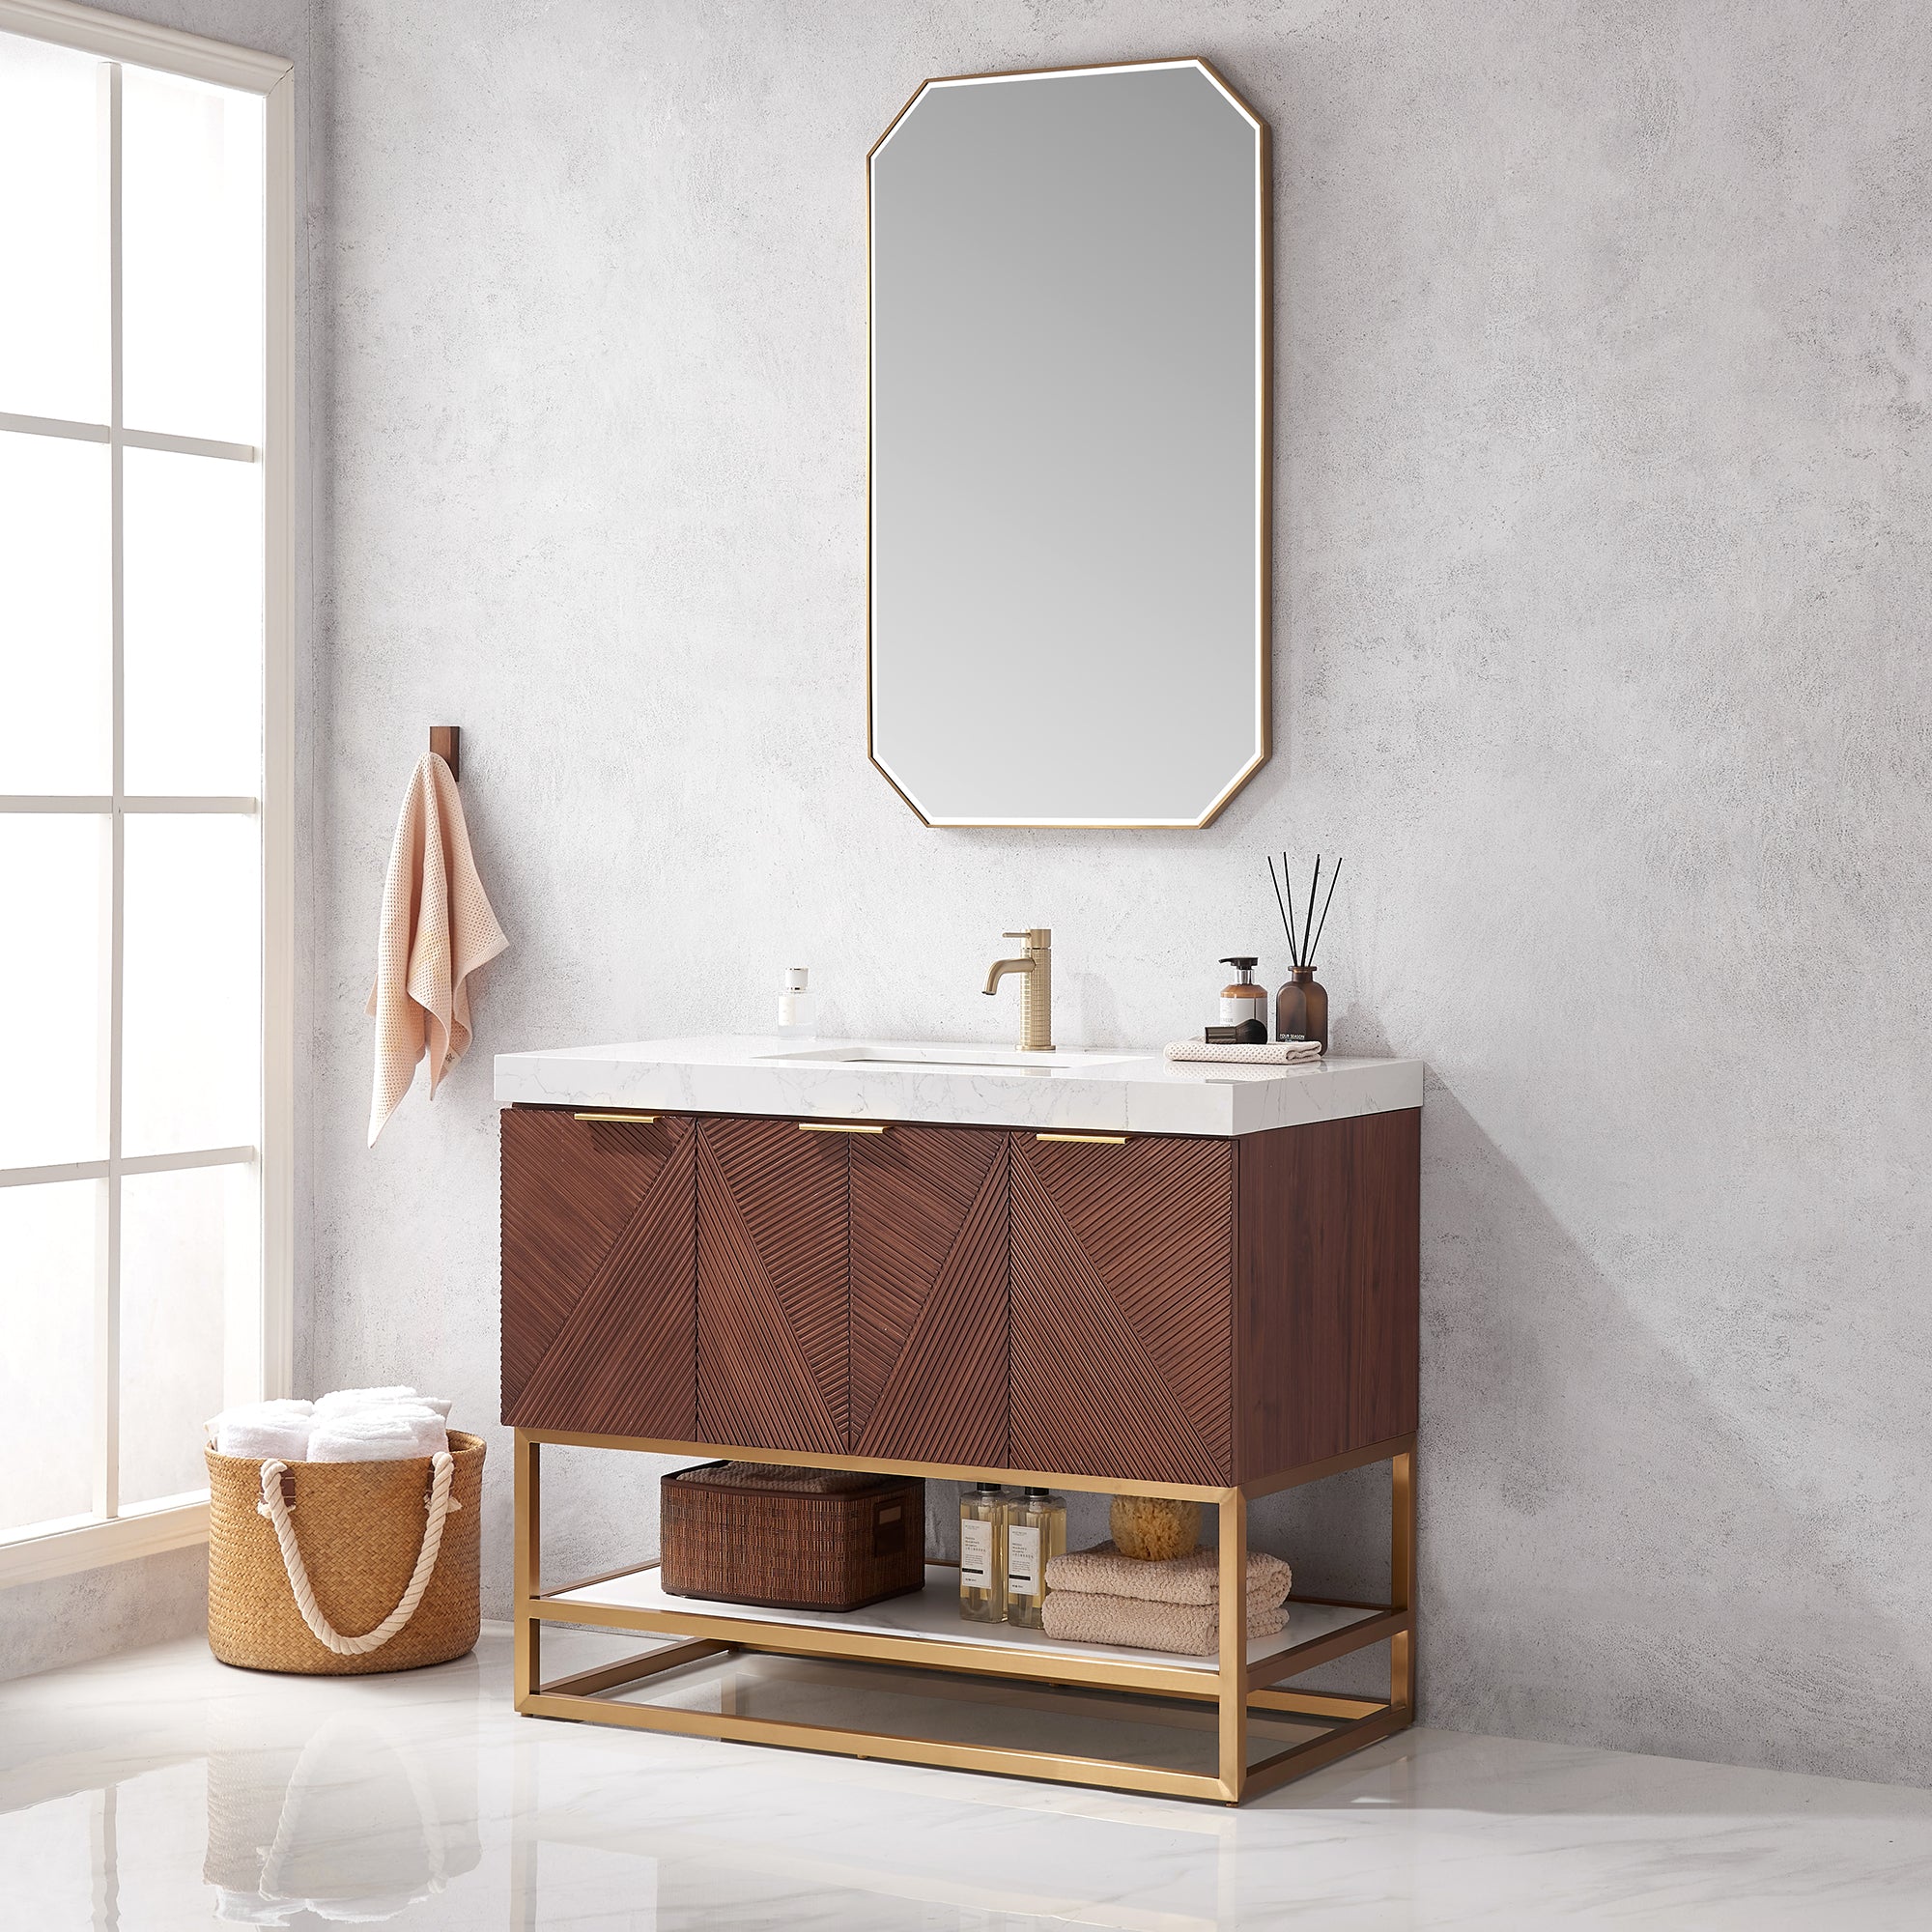 Mahon 42G" Free-standing Single Bath Vanity in North American Deep Walnut with White Grain Composite Stone Top